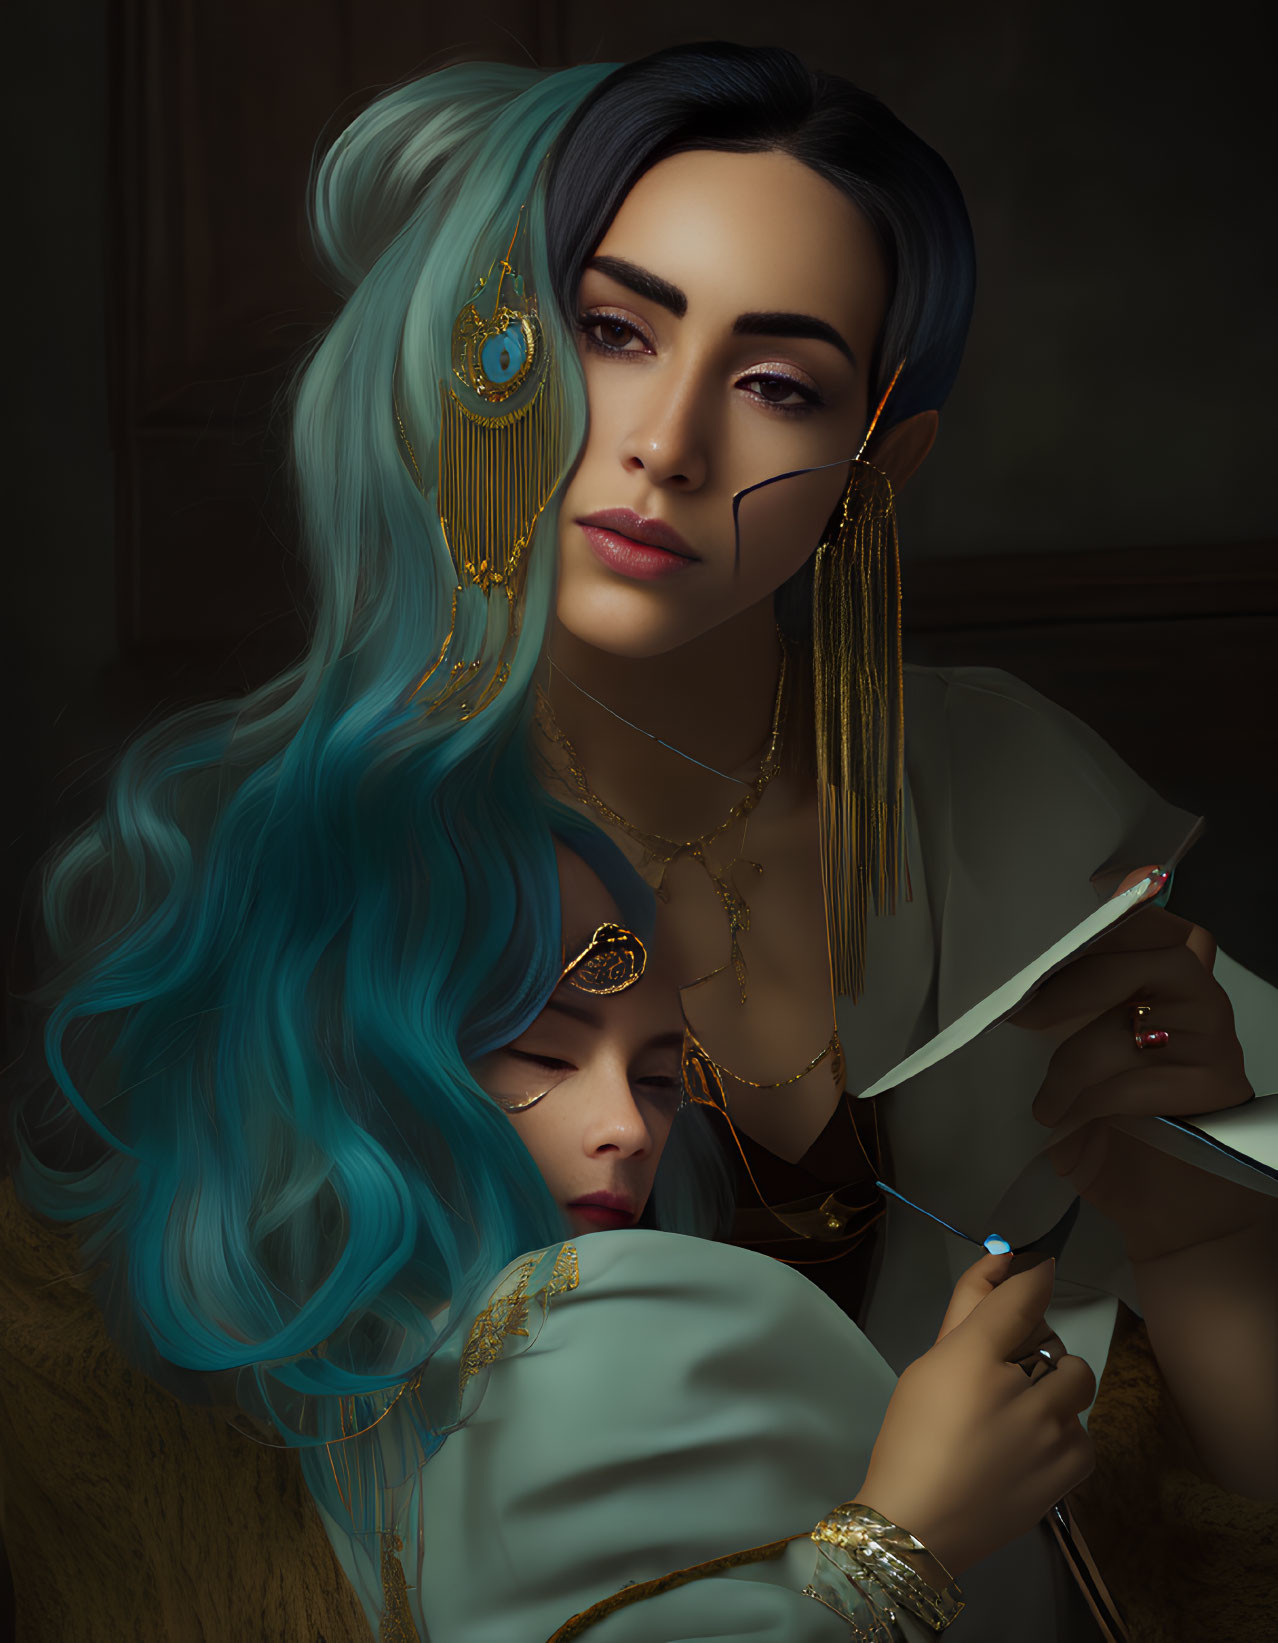 Stylized portrait of two individuals with teal and dark hair and gold jewelry, holding paintbrushes